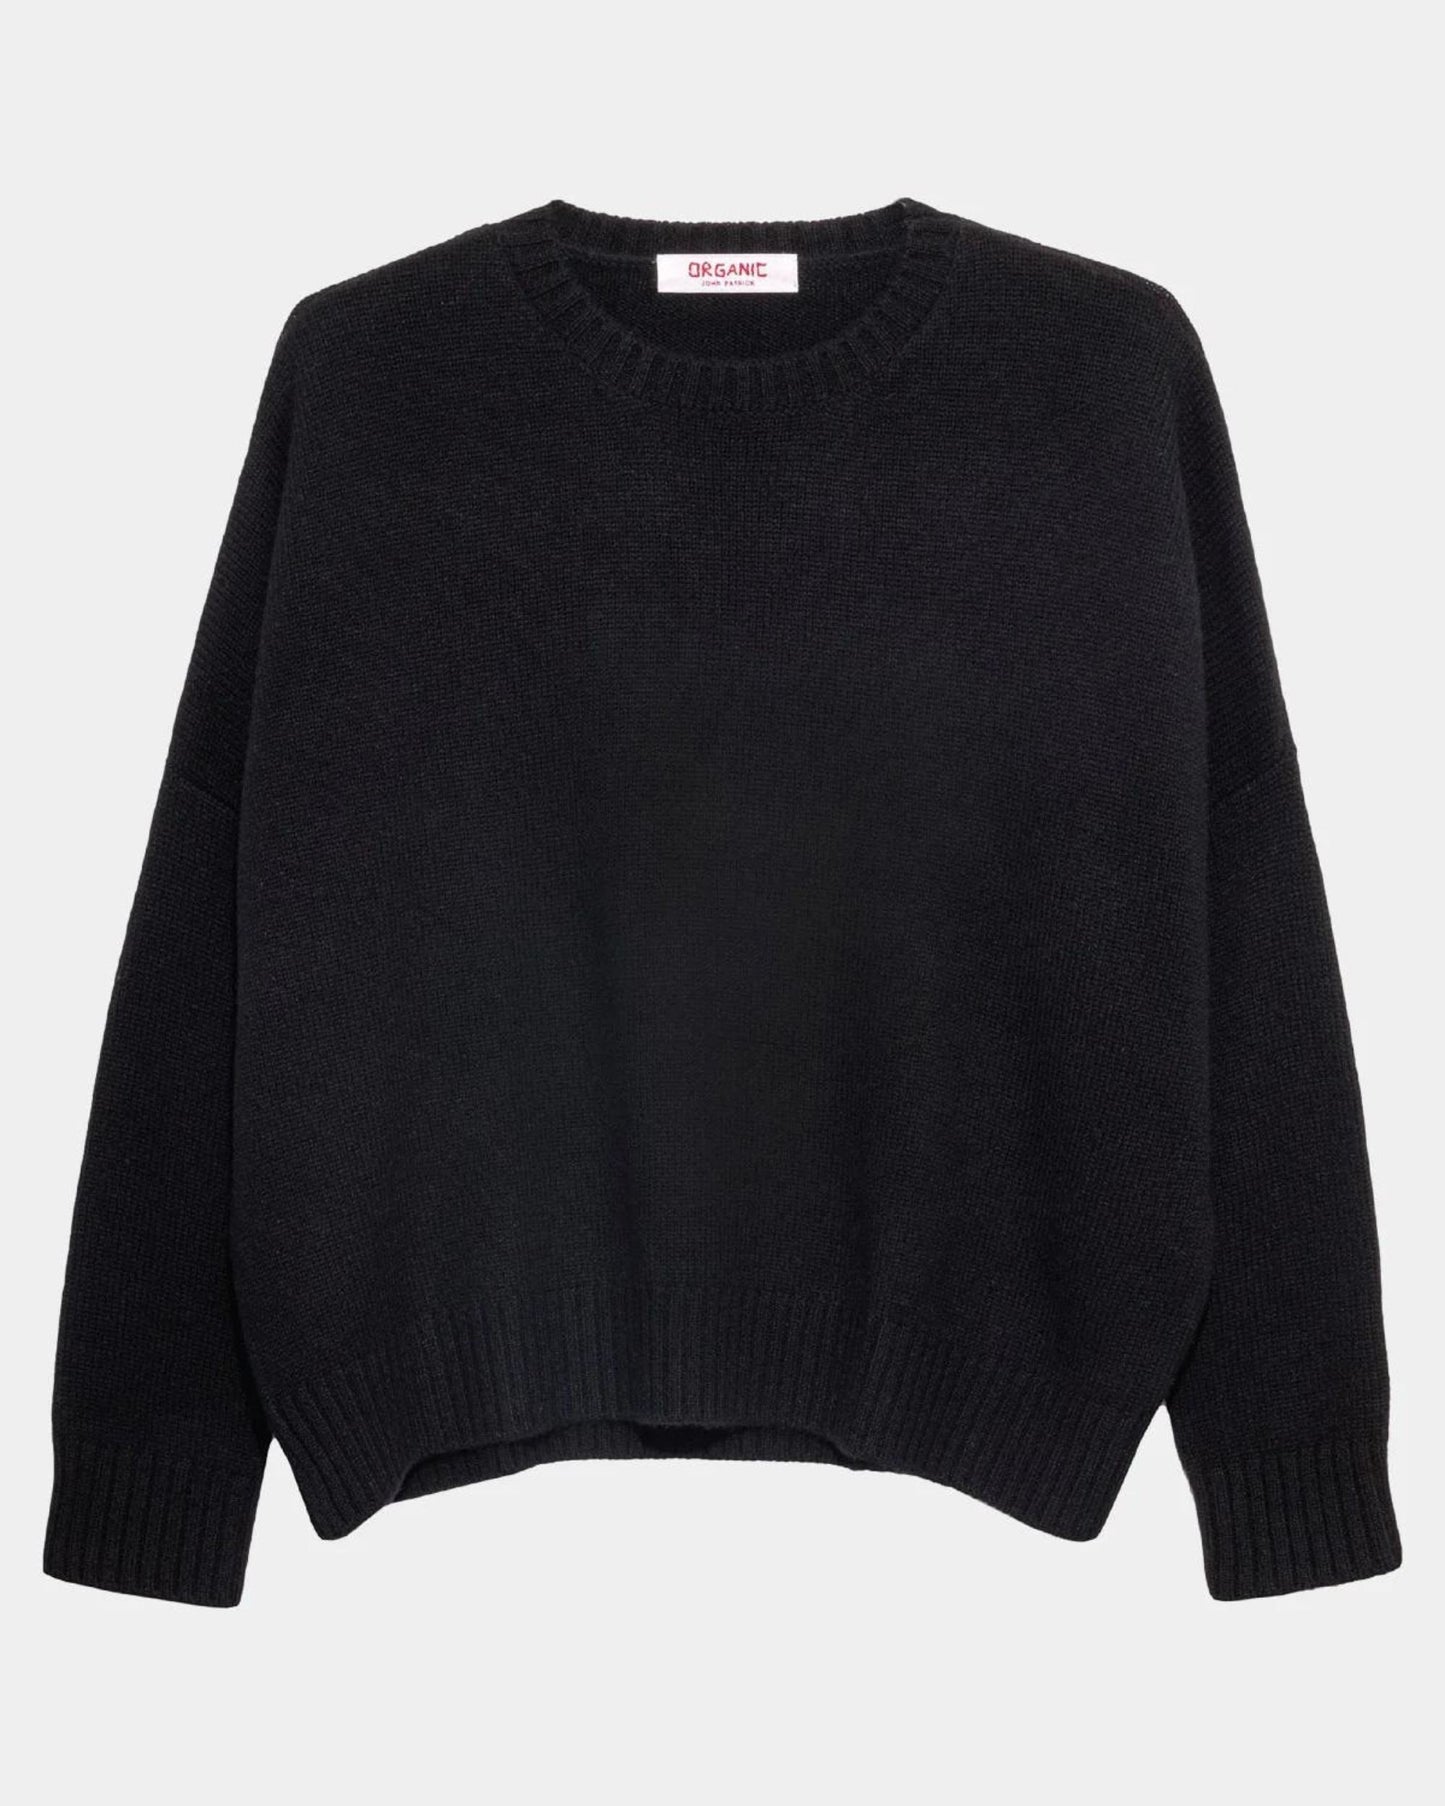 Organic by John Patrick Cashmere Wide Pullover Black